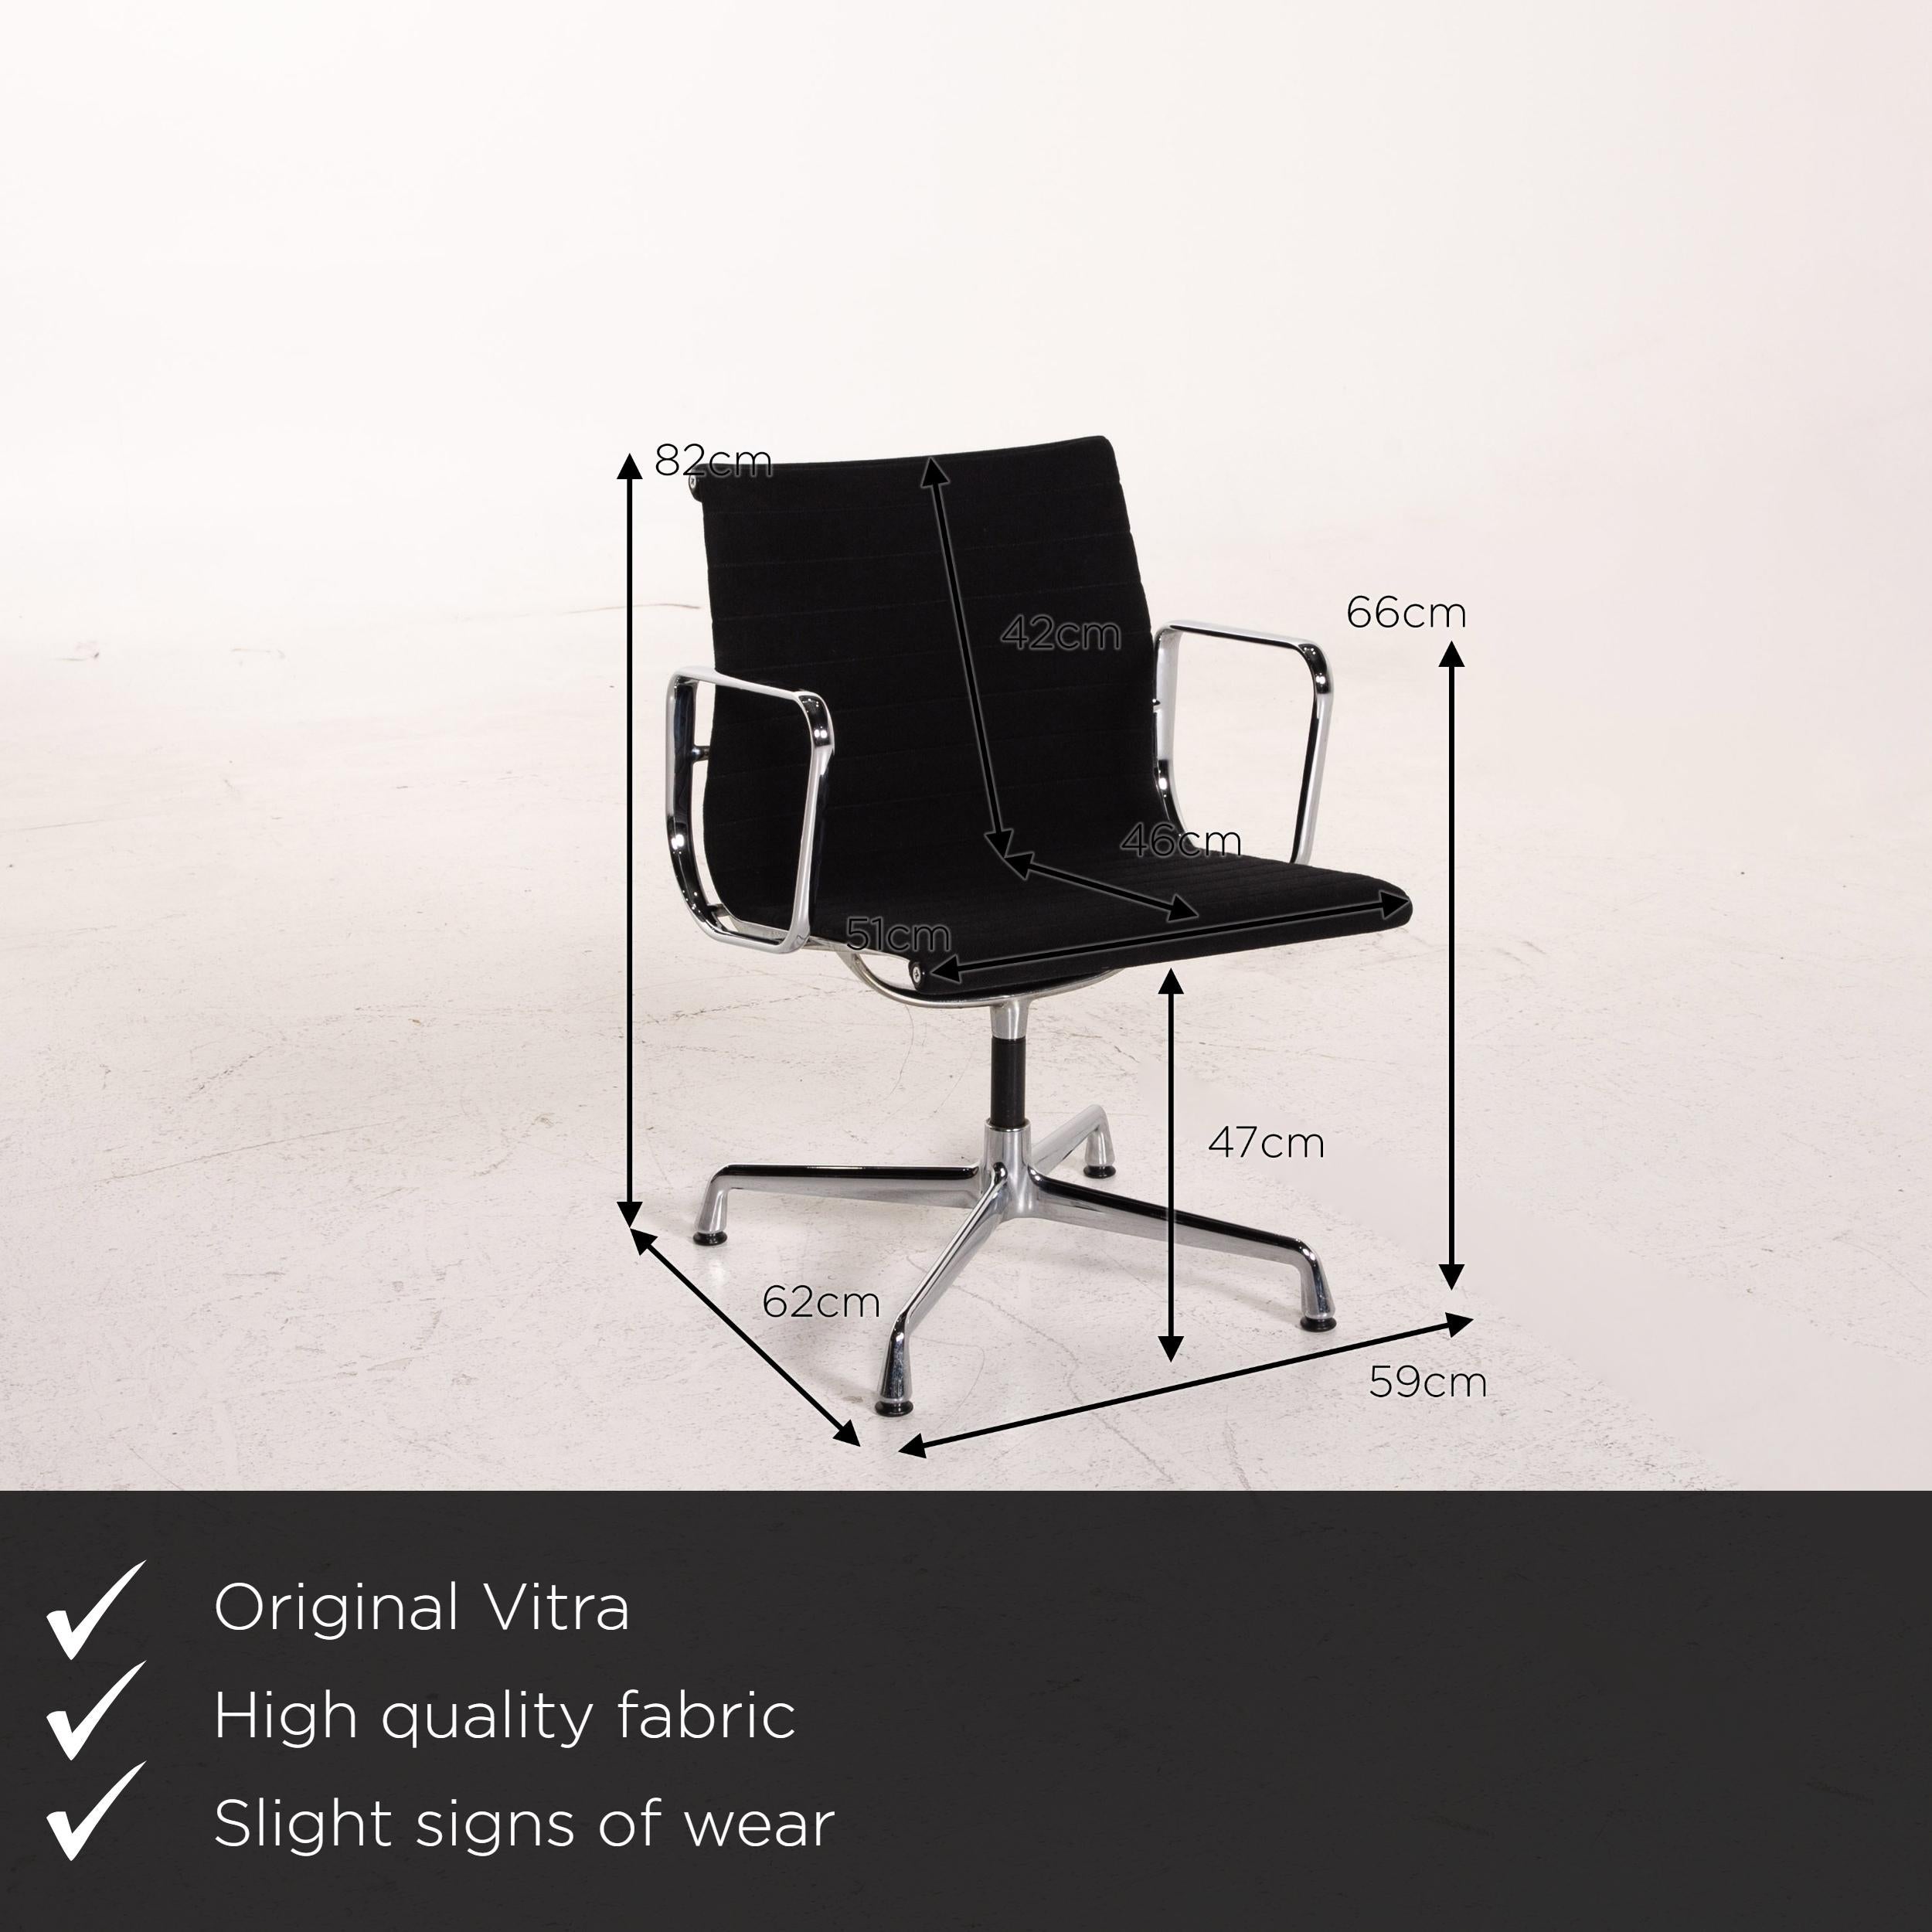 We present to you a Vitra EA 108 fabric aluminum chair black swivel.
 

 Product measurements in centimeters:
 

Depth: 62
Width: 59
Height: 82
Seat height: 47
Rest height: 66
Seat depth: 46
Seat width: 51
Back height: 42.

 